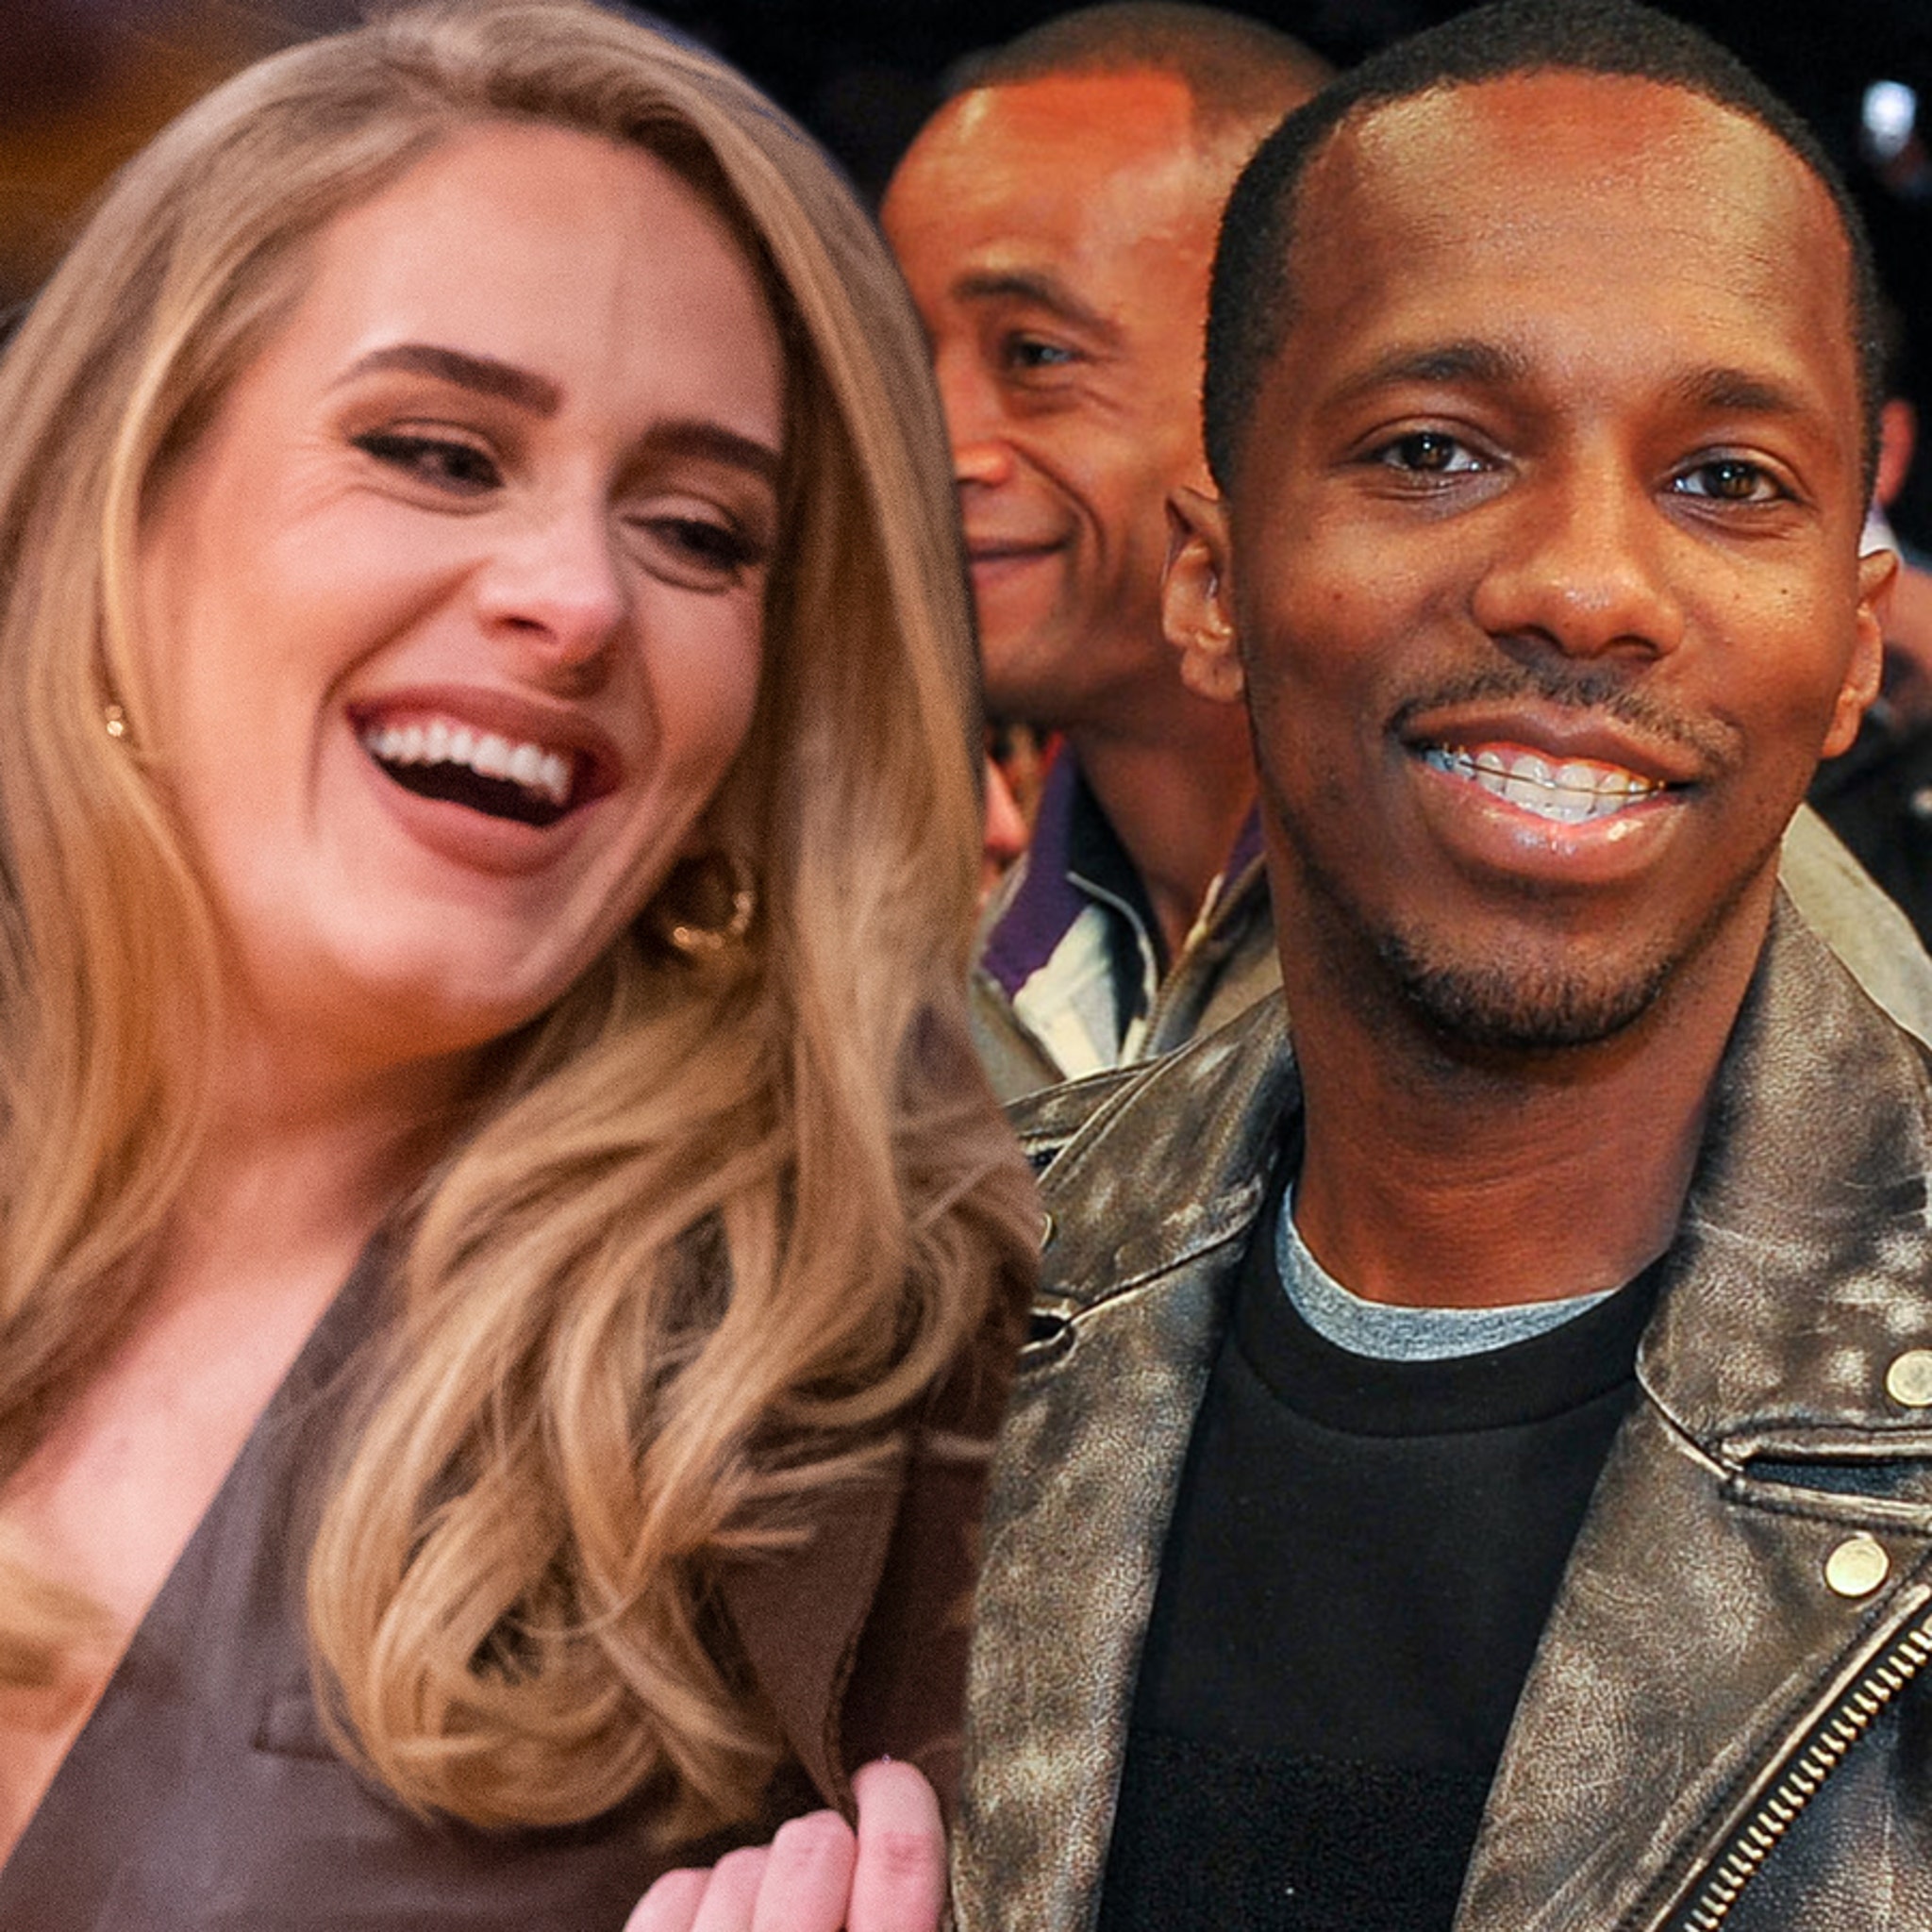 Fans Think Adele Married Rich Paul After 'The Paul's' Sign in IG Post